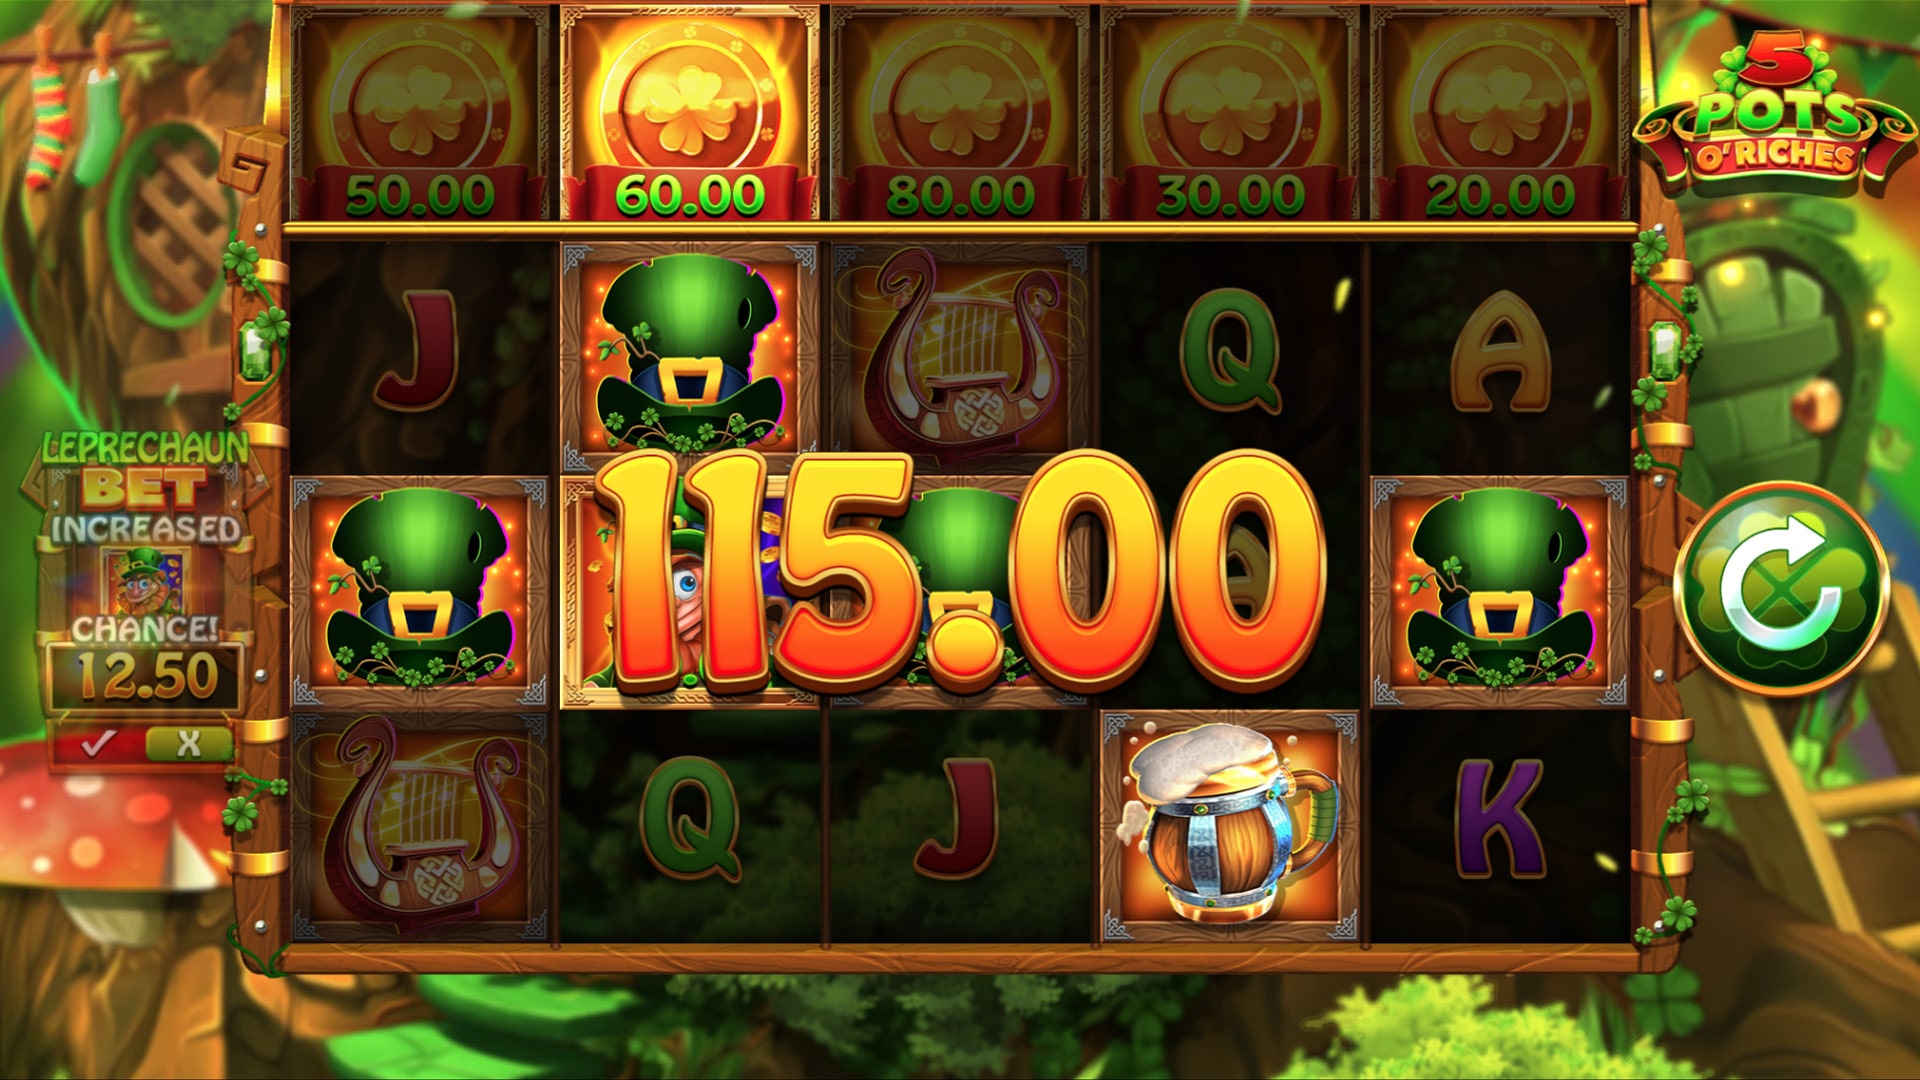 5 Pots O Riches Free Spins